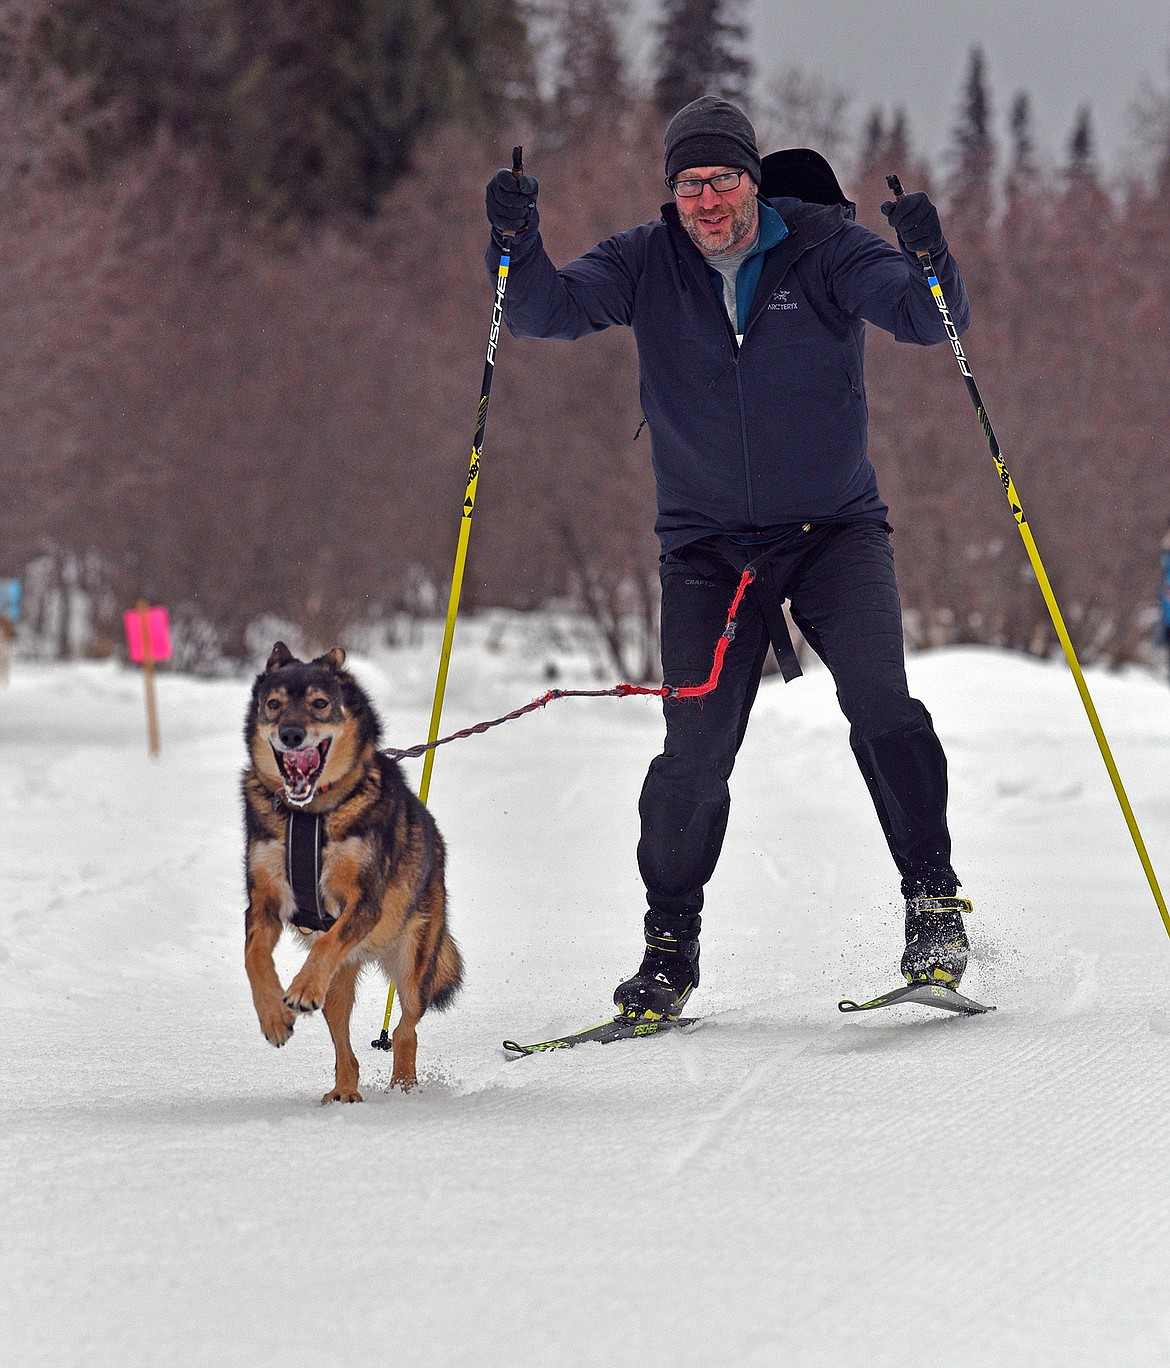 Flathead Classic skijoring competitors race at Dog Creek Lodge and Nordic Center in Olney. (Julie Engler/Whitefish Pilot)